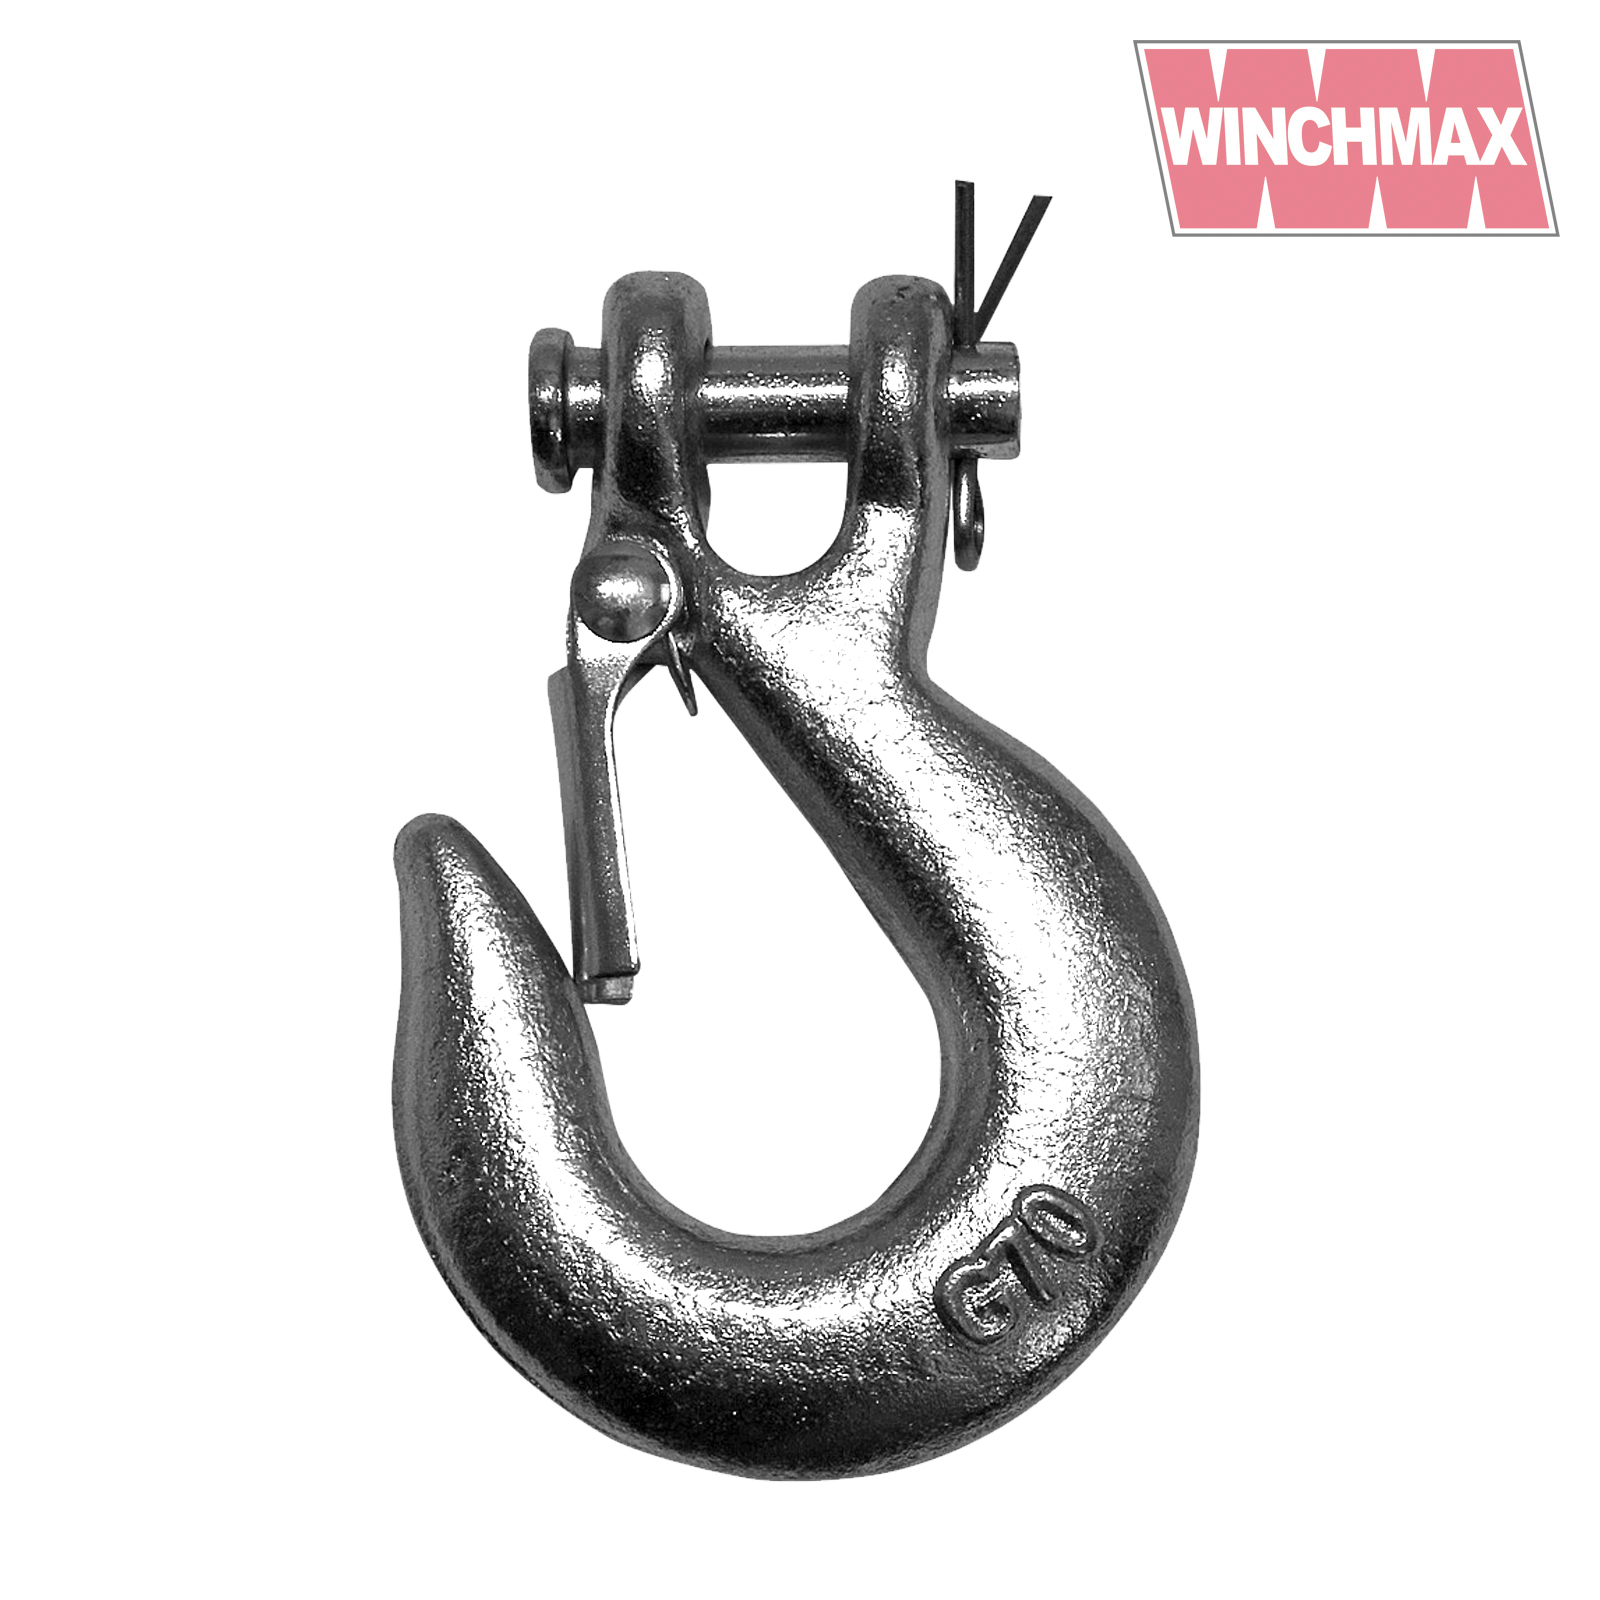 Winchmax 1/4 Inch Clevis Hook